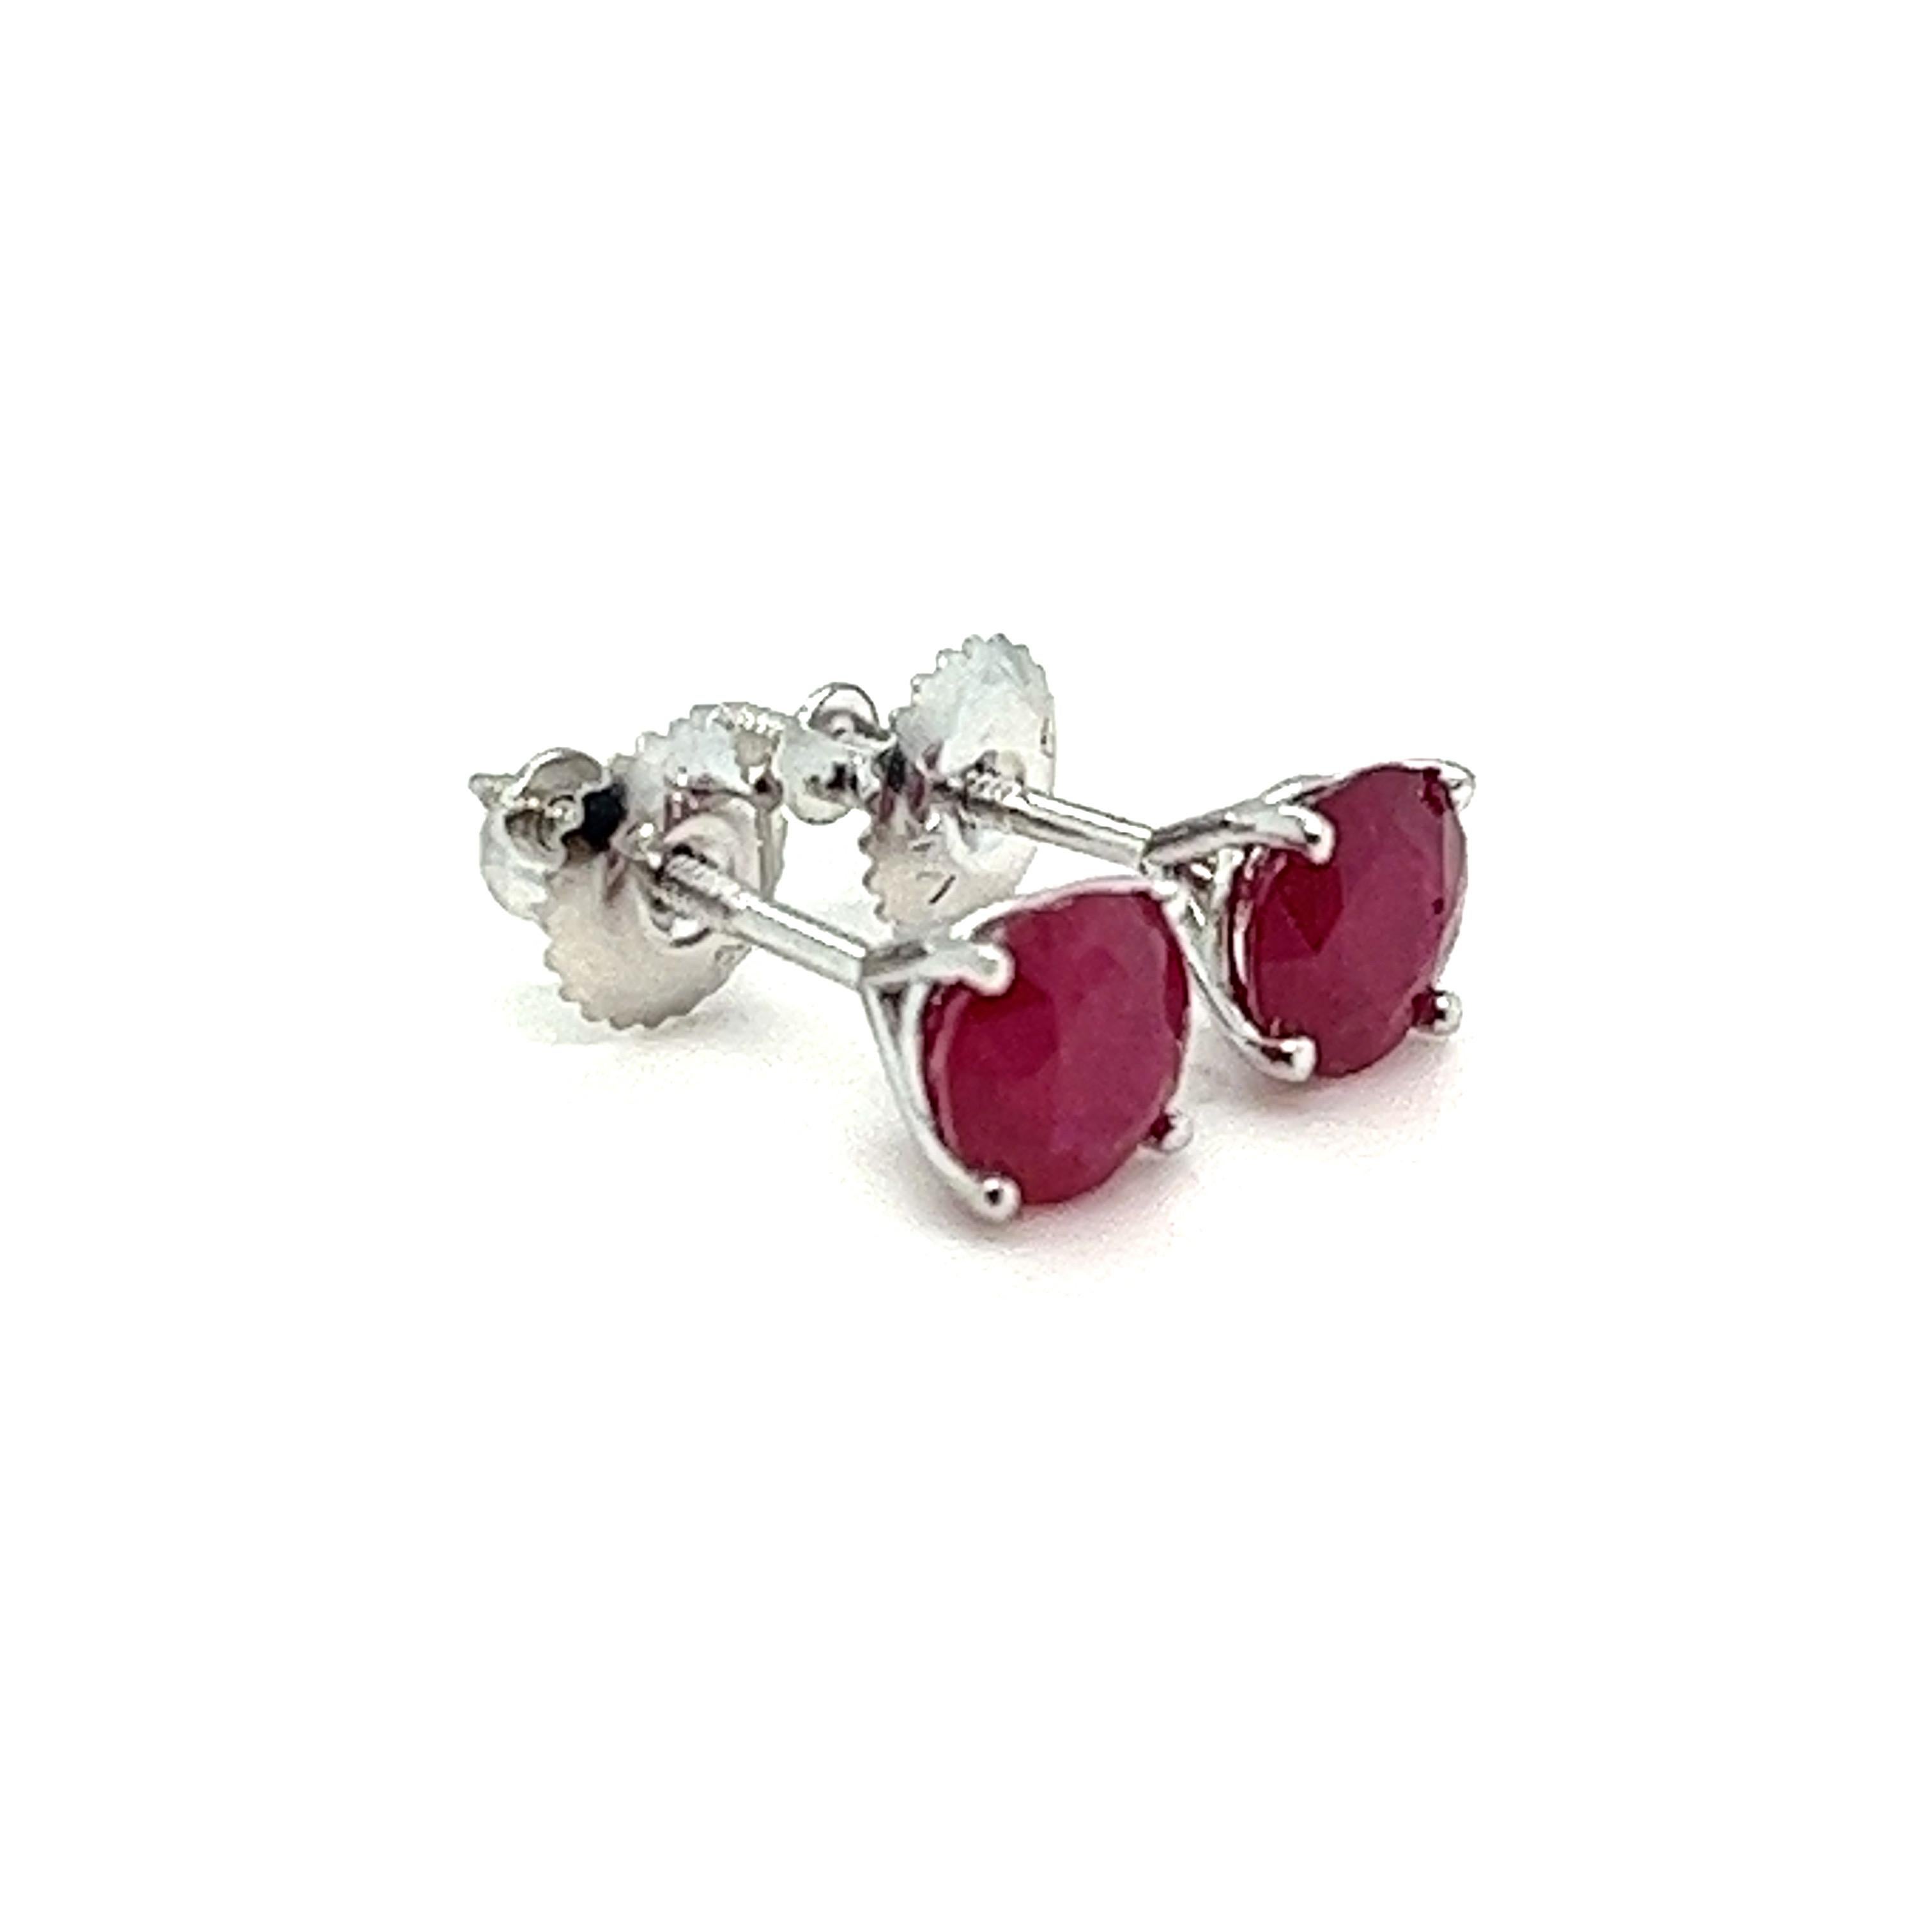 Brilliant Cut 2 Carats Natural Ruby Stud Earring in 14K White Gold, Screw-Backs. For Sale